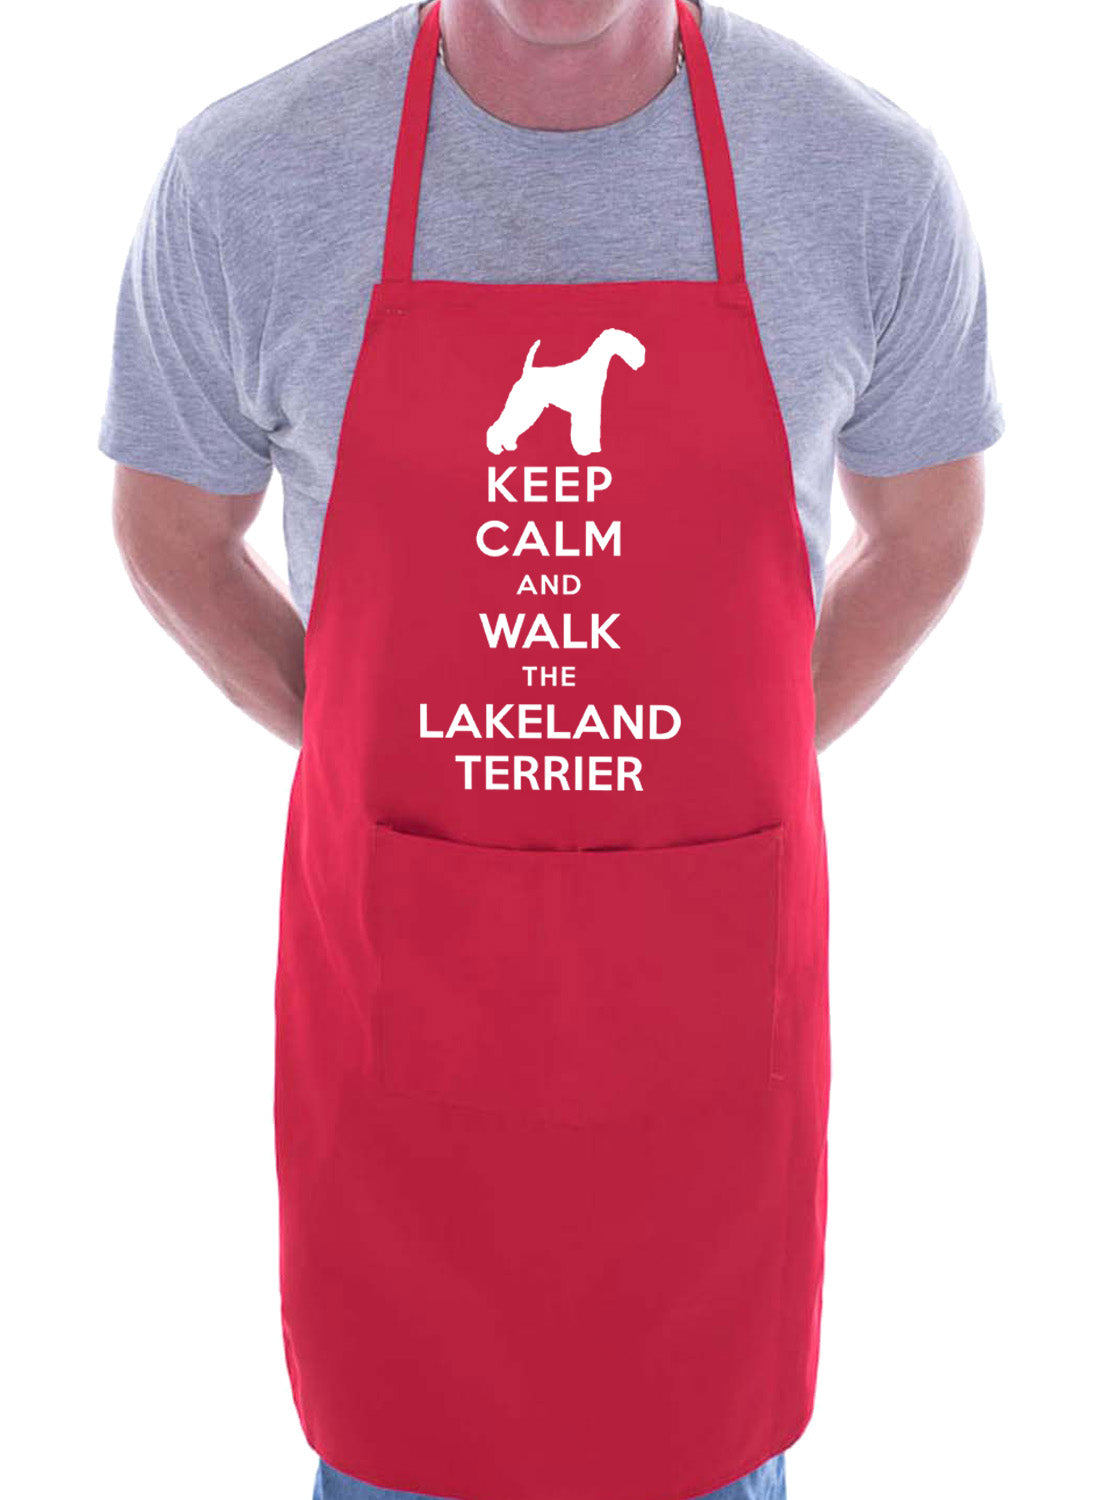 Keep Calm and Walk Lakeland Terrier Dog Funny BBQ Novelty Cooking Apron